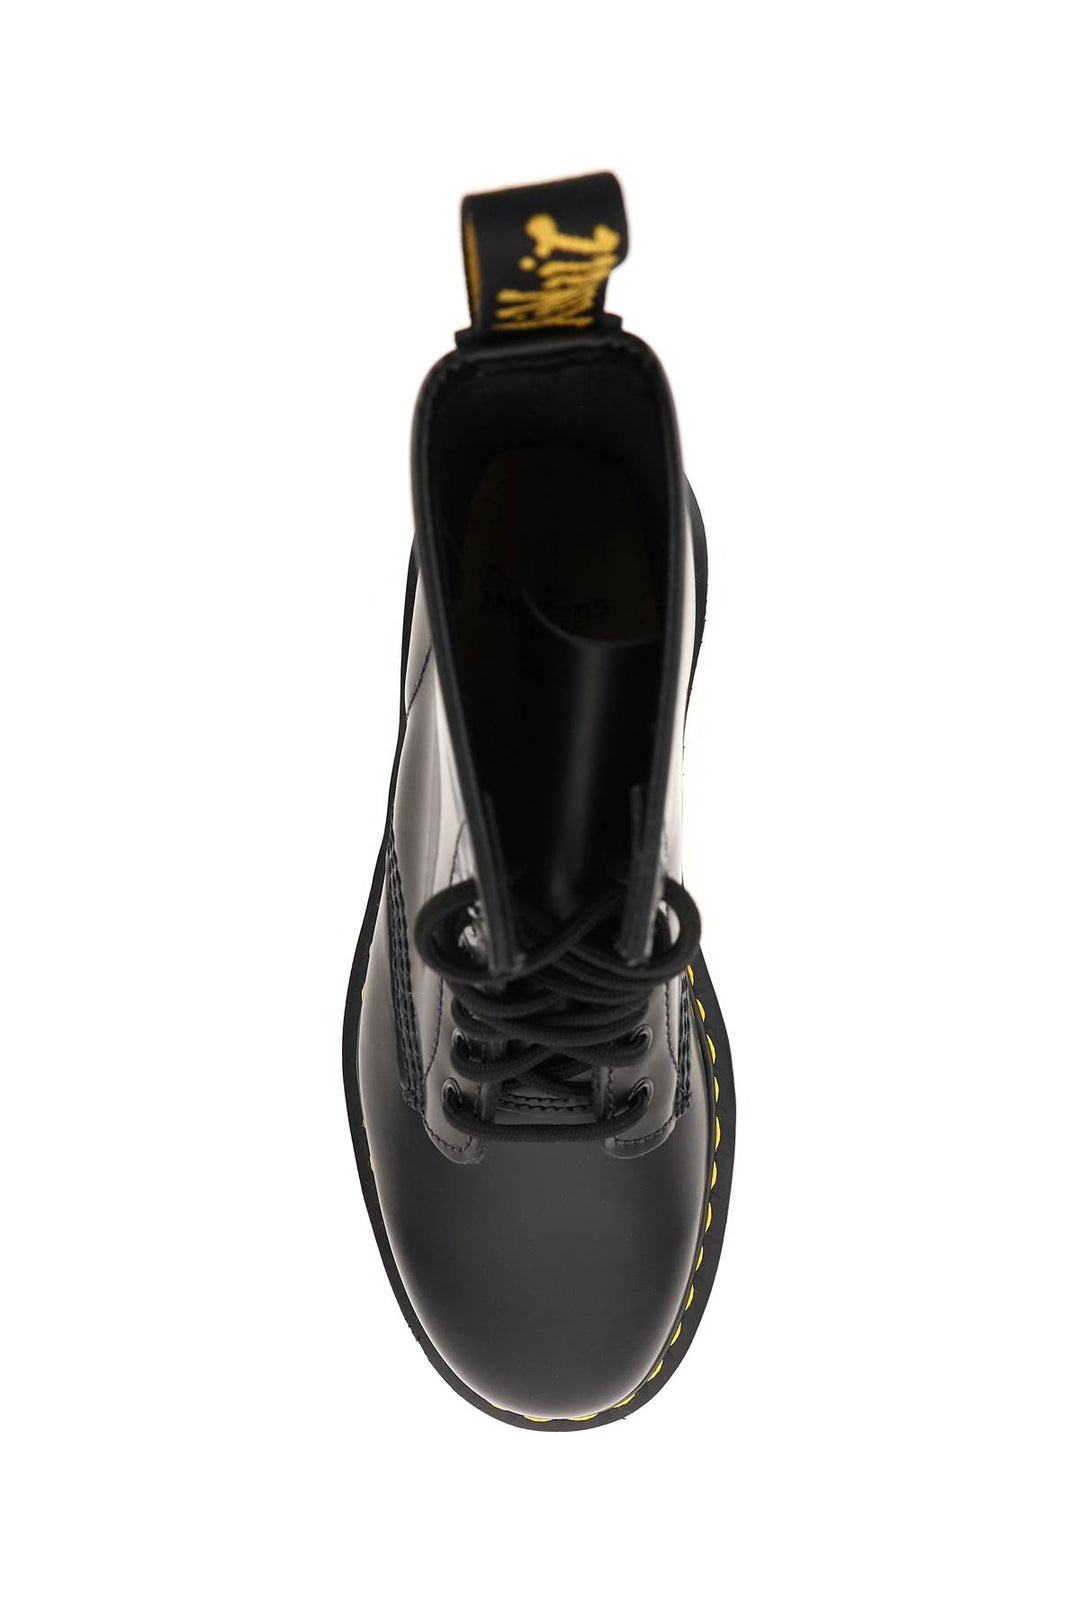 Dr.Martens 1460 Smooth Lace Up Combat Boots   Black